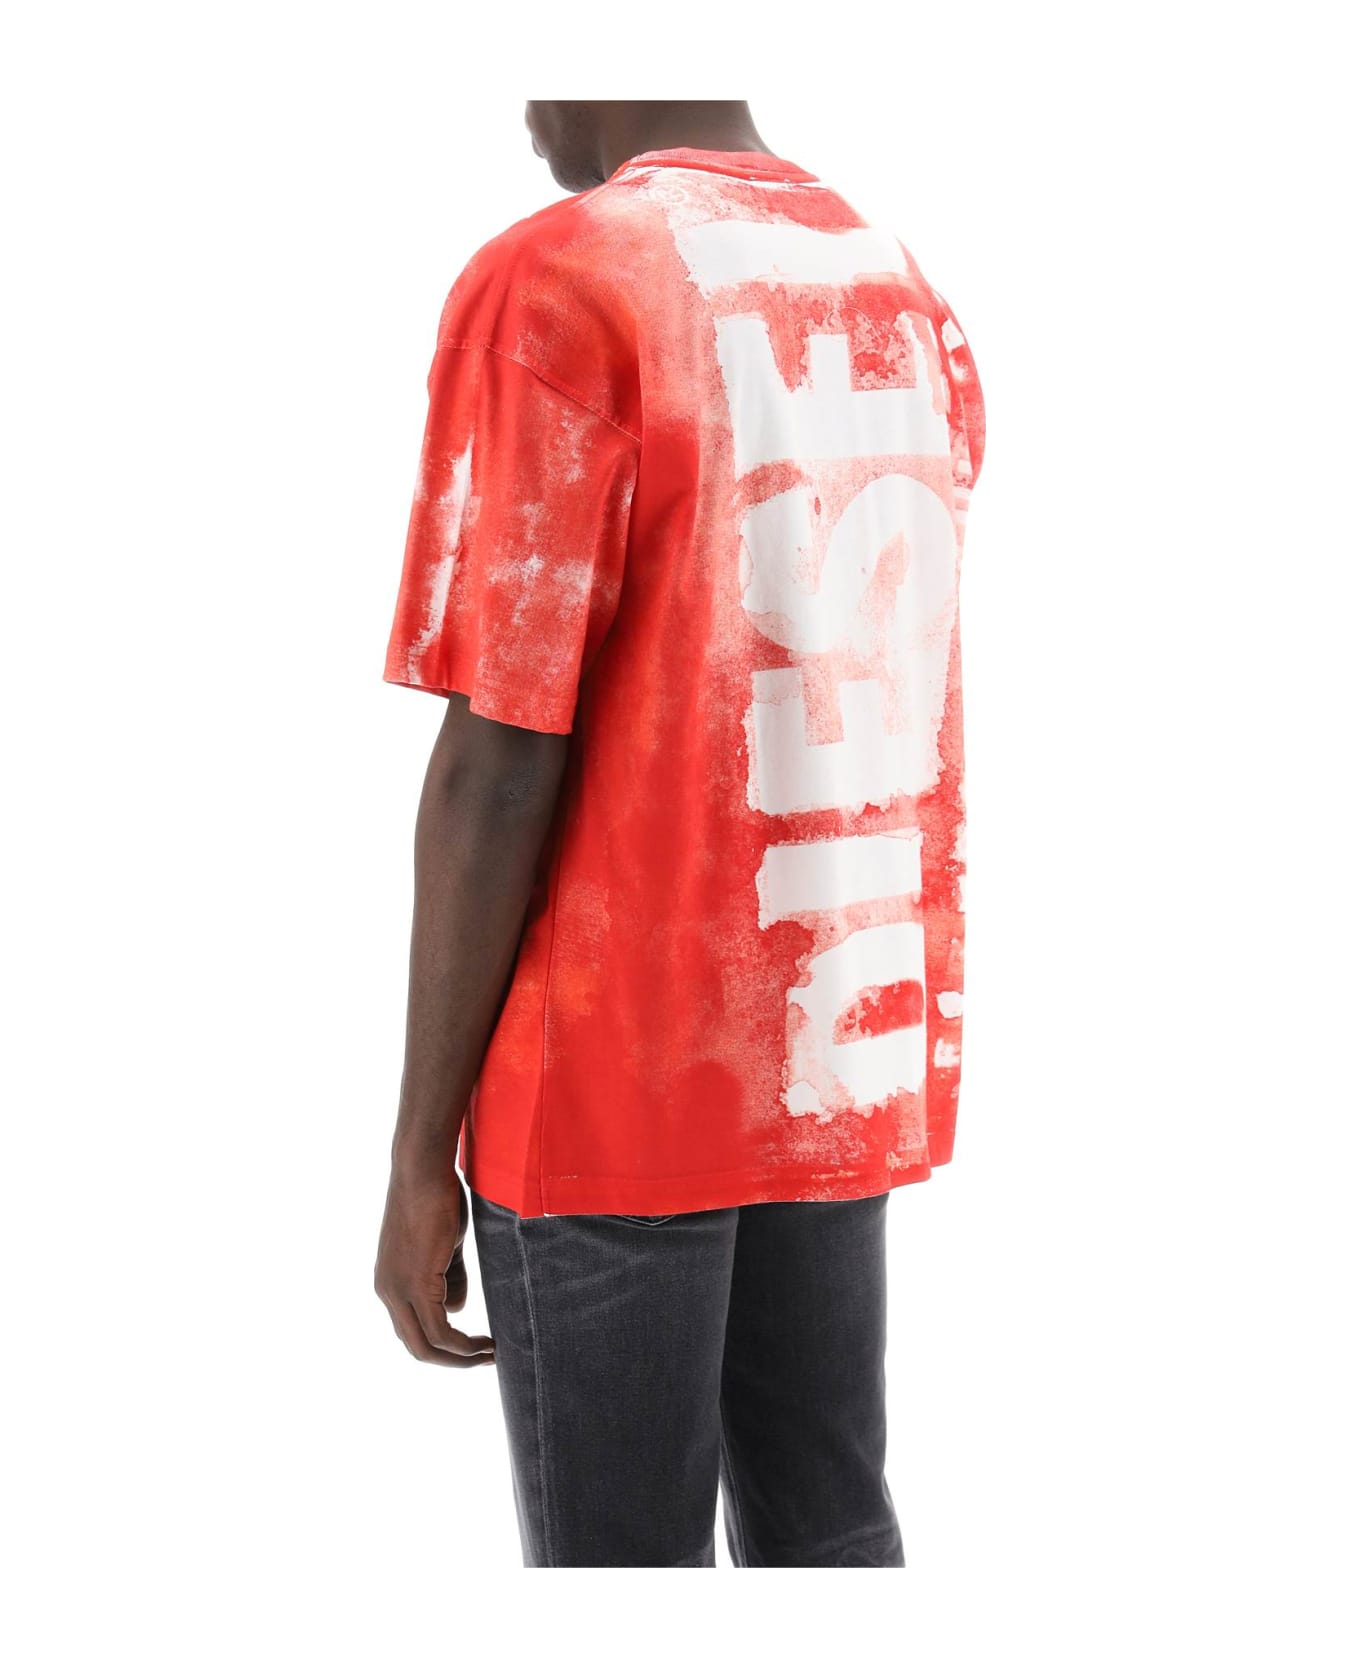 Diesel Printed T-shirt With Oversized Logo - Aa Red